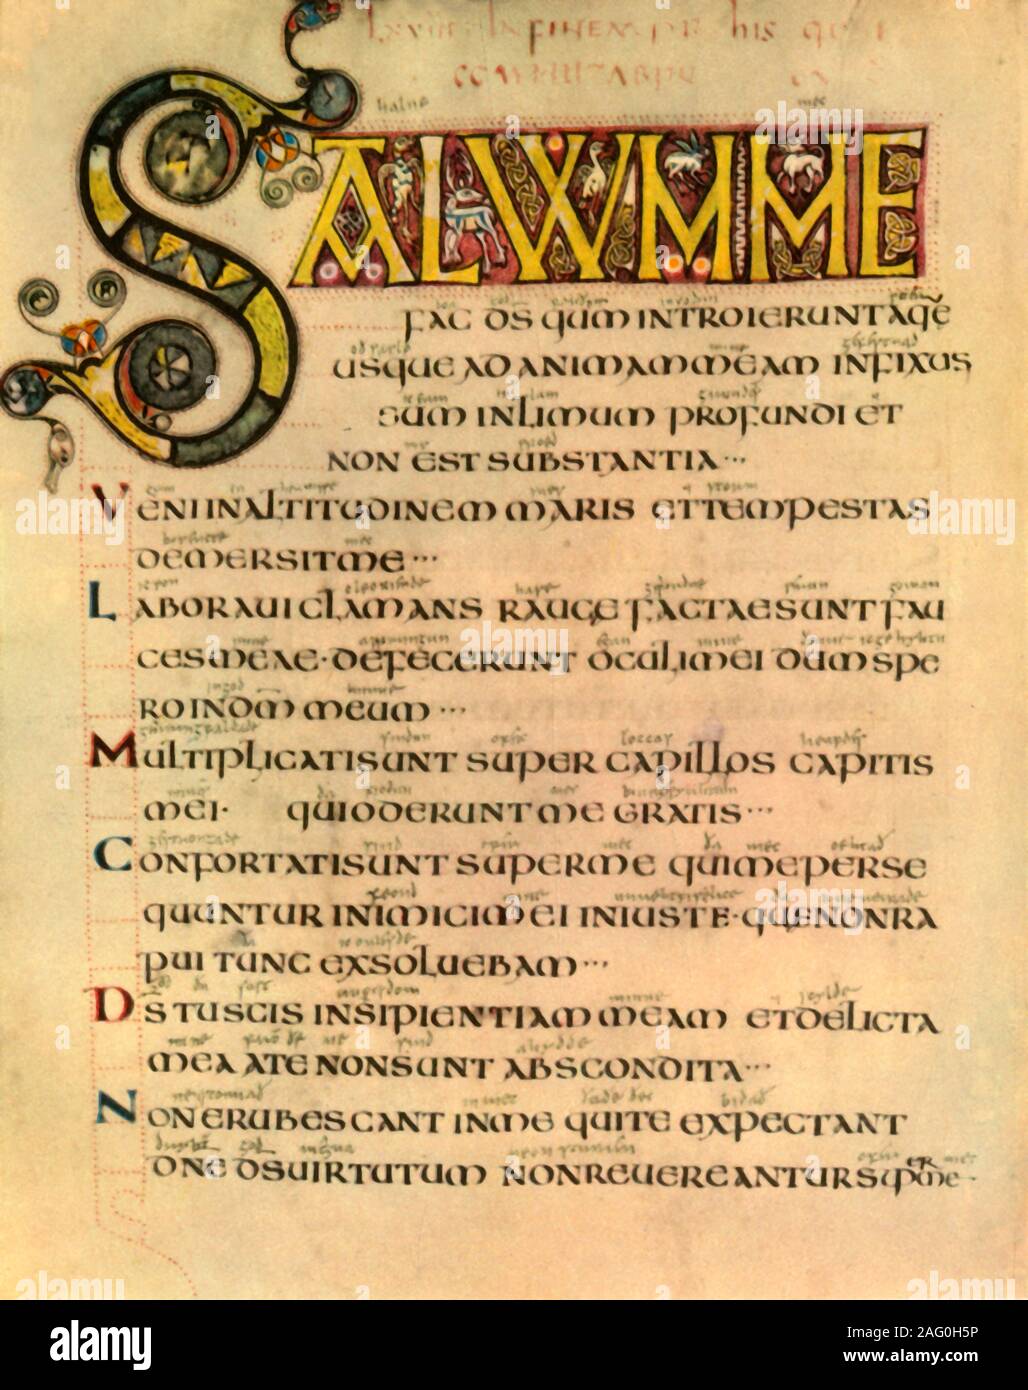 'A Page from the Earliest English Psalter', (1947). Illustration and Latin text from a Book of Psalms: 'St Jerome's Roman Version with Canticles and Hymns written in England in the 8th century. The Anglo-Saxon interlinear translation was added in the 9th century'. Manuscript in the British Library, London. From &quot;English Hymns and Hymn Writers&quot;, by Adam Fox. [Collins, London, 1947] Stock Photo